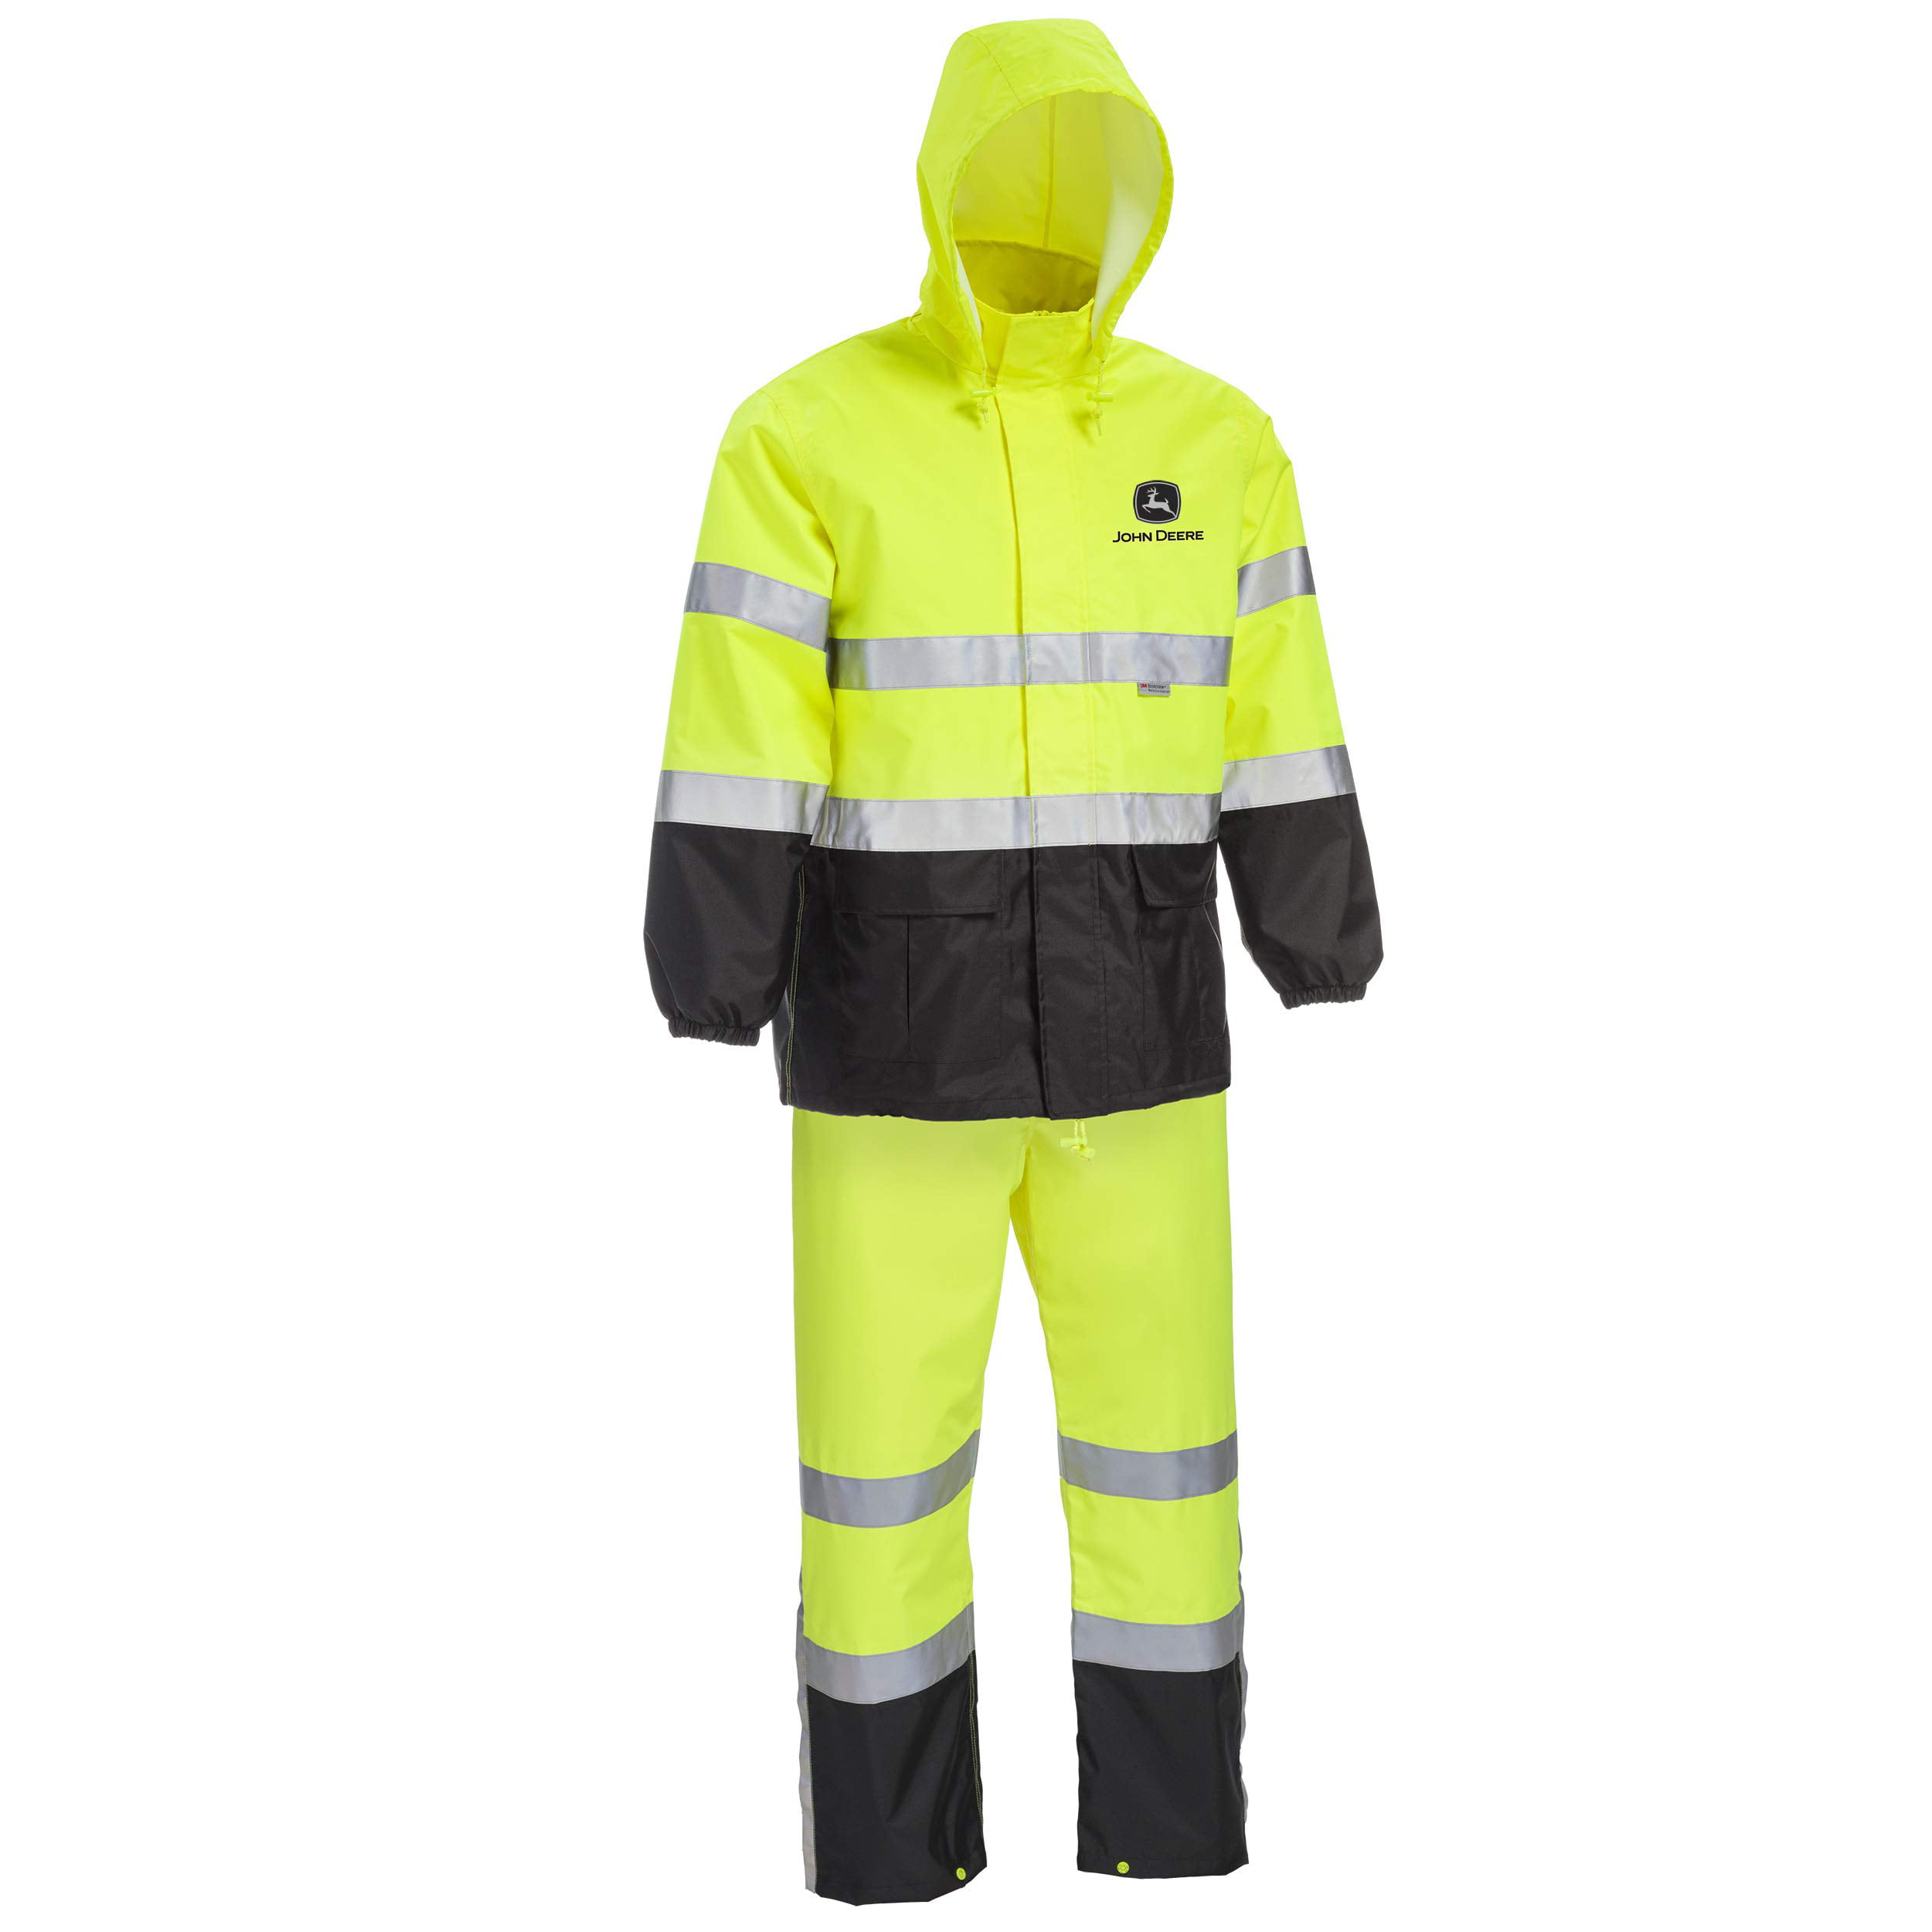 Stay Safe and Visible with John Deere Hi-Vis ANSI Class 3 Rain Suit